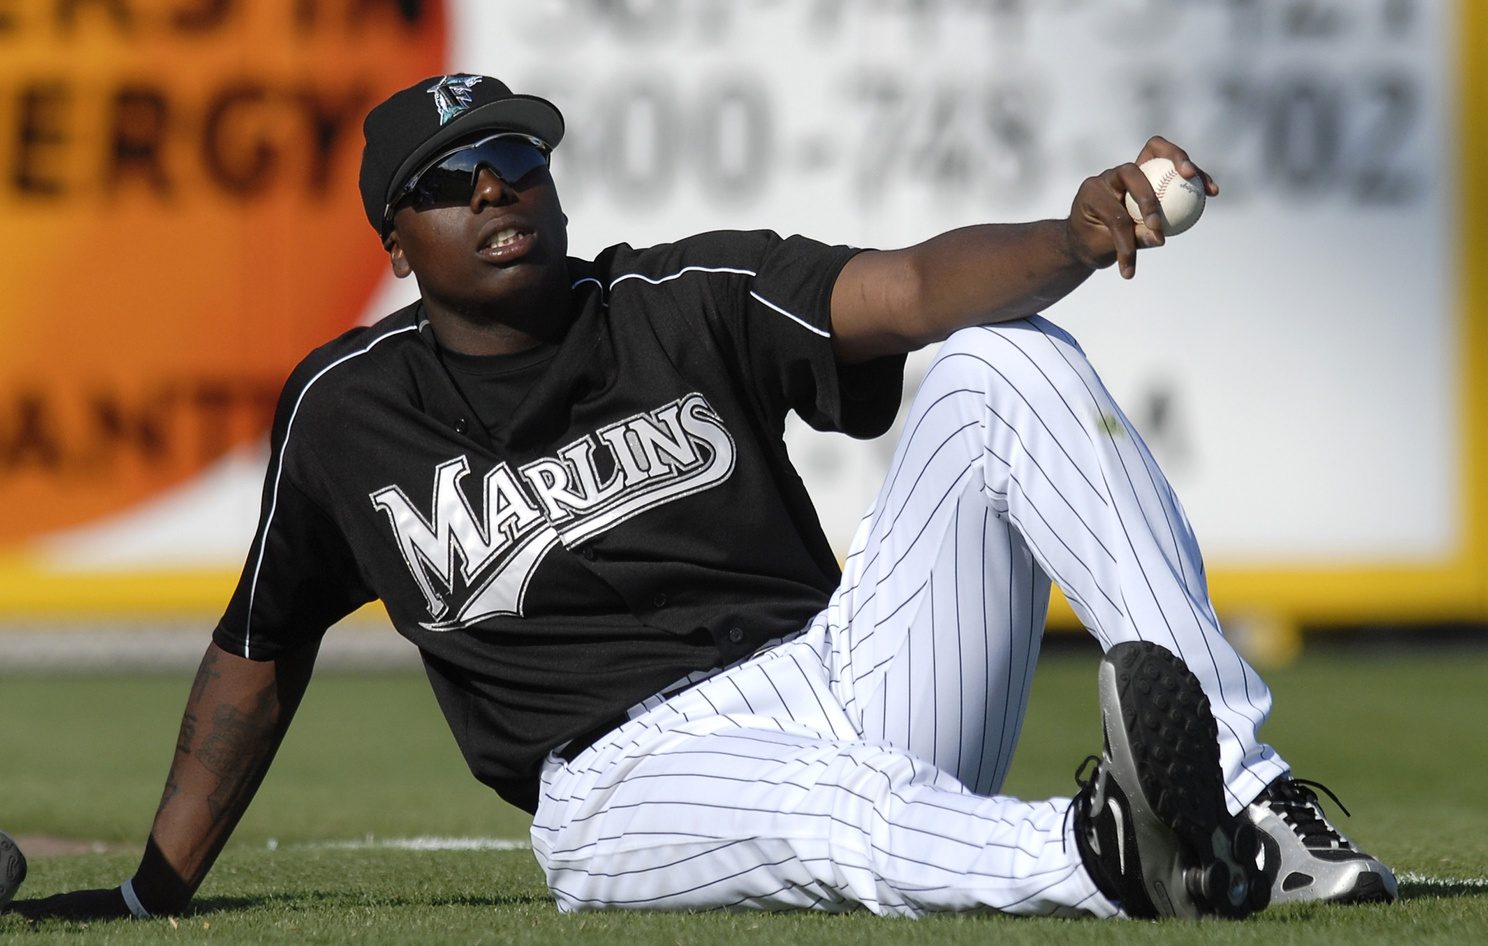 Catching up with Dontrelle Willis who is, once again, on the